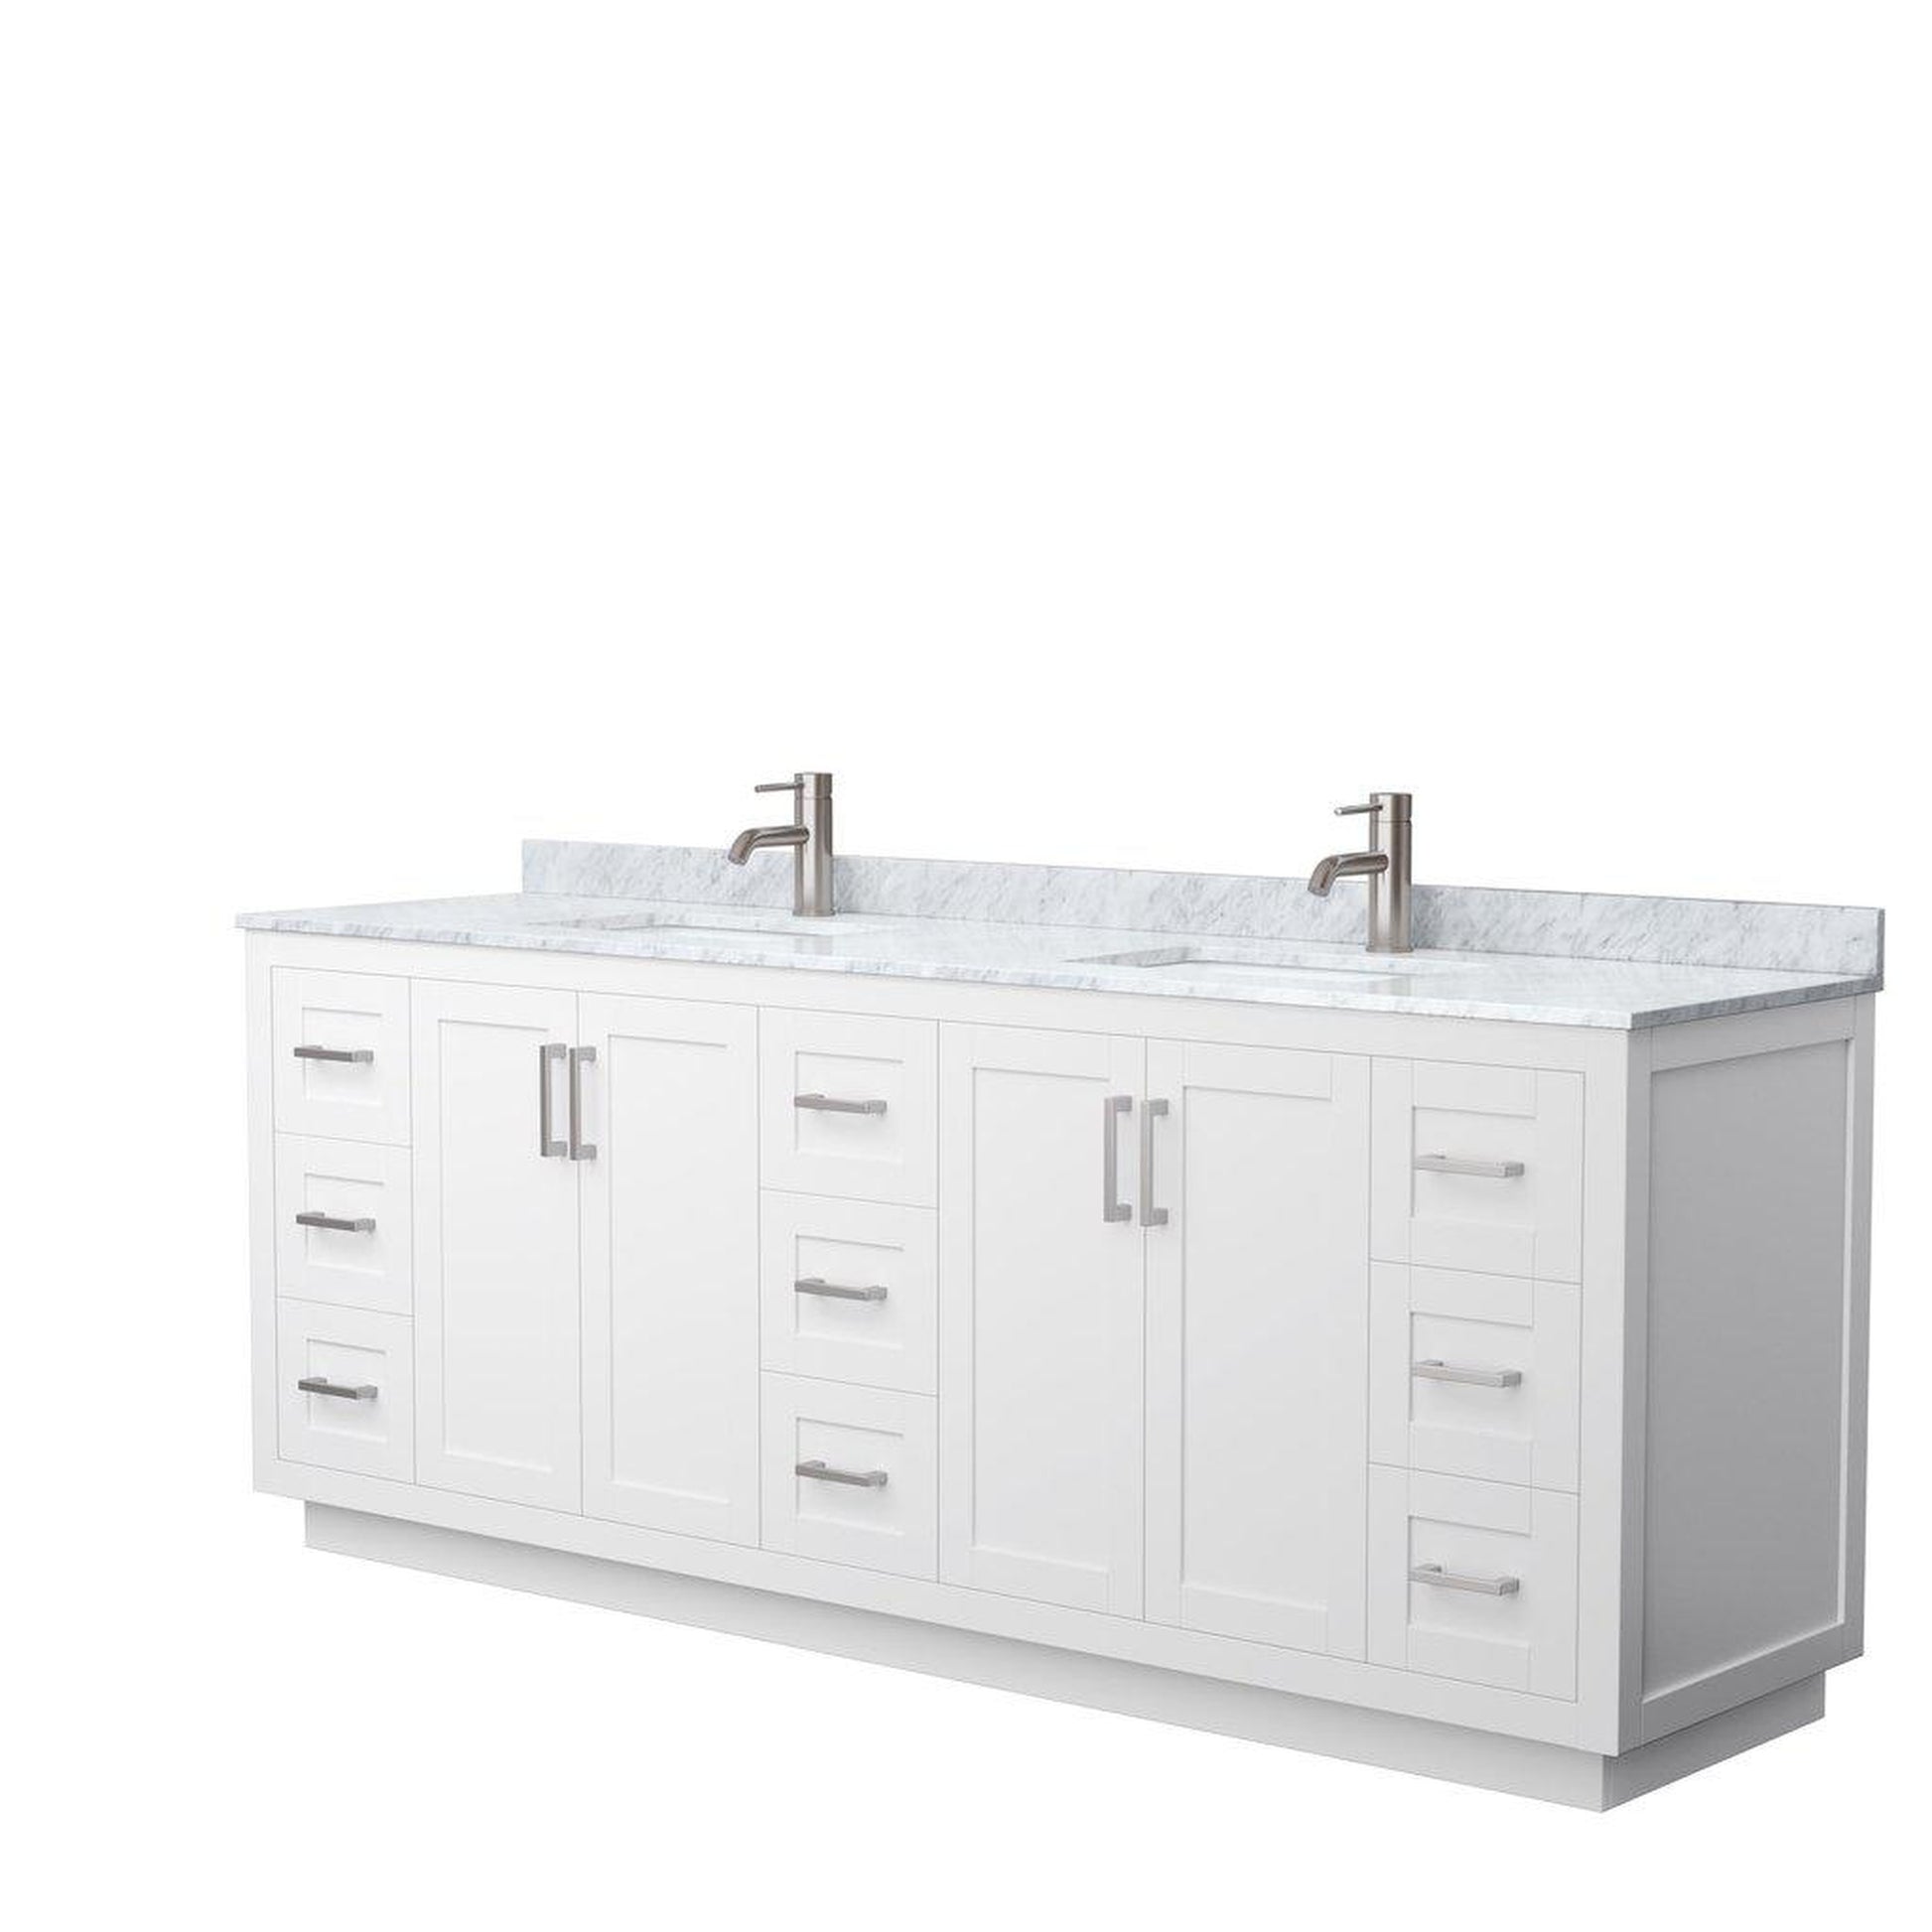 Wyndham Collection Miranda 84" Double Bathroom White Vanity Set With White Carrara Marble Countertop, Undermount Square Sink, And Brushed Nickel Trim